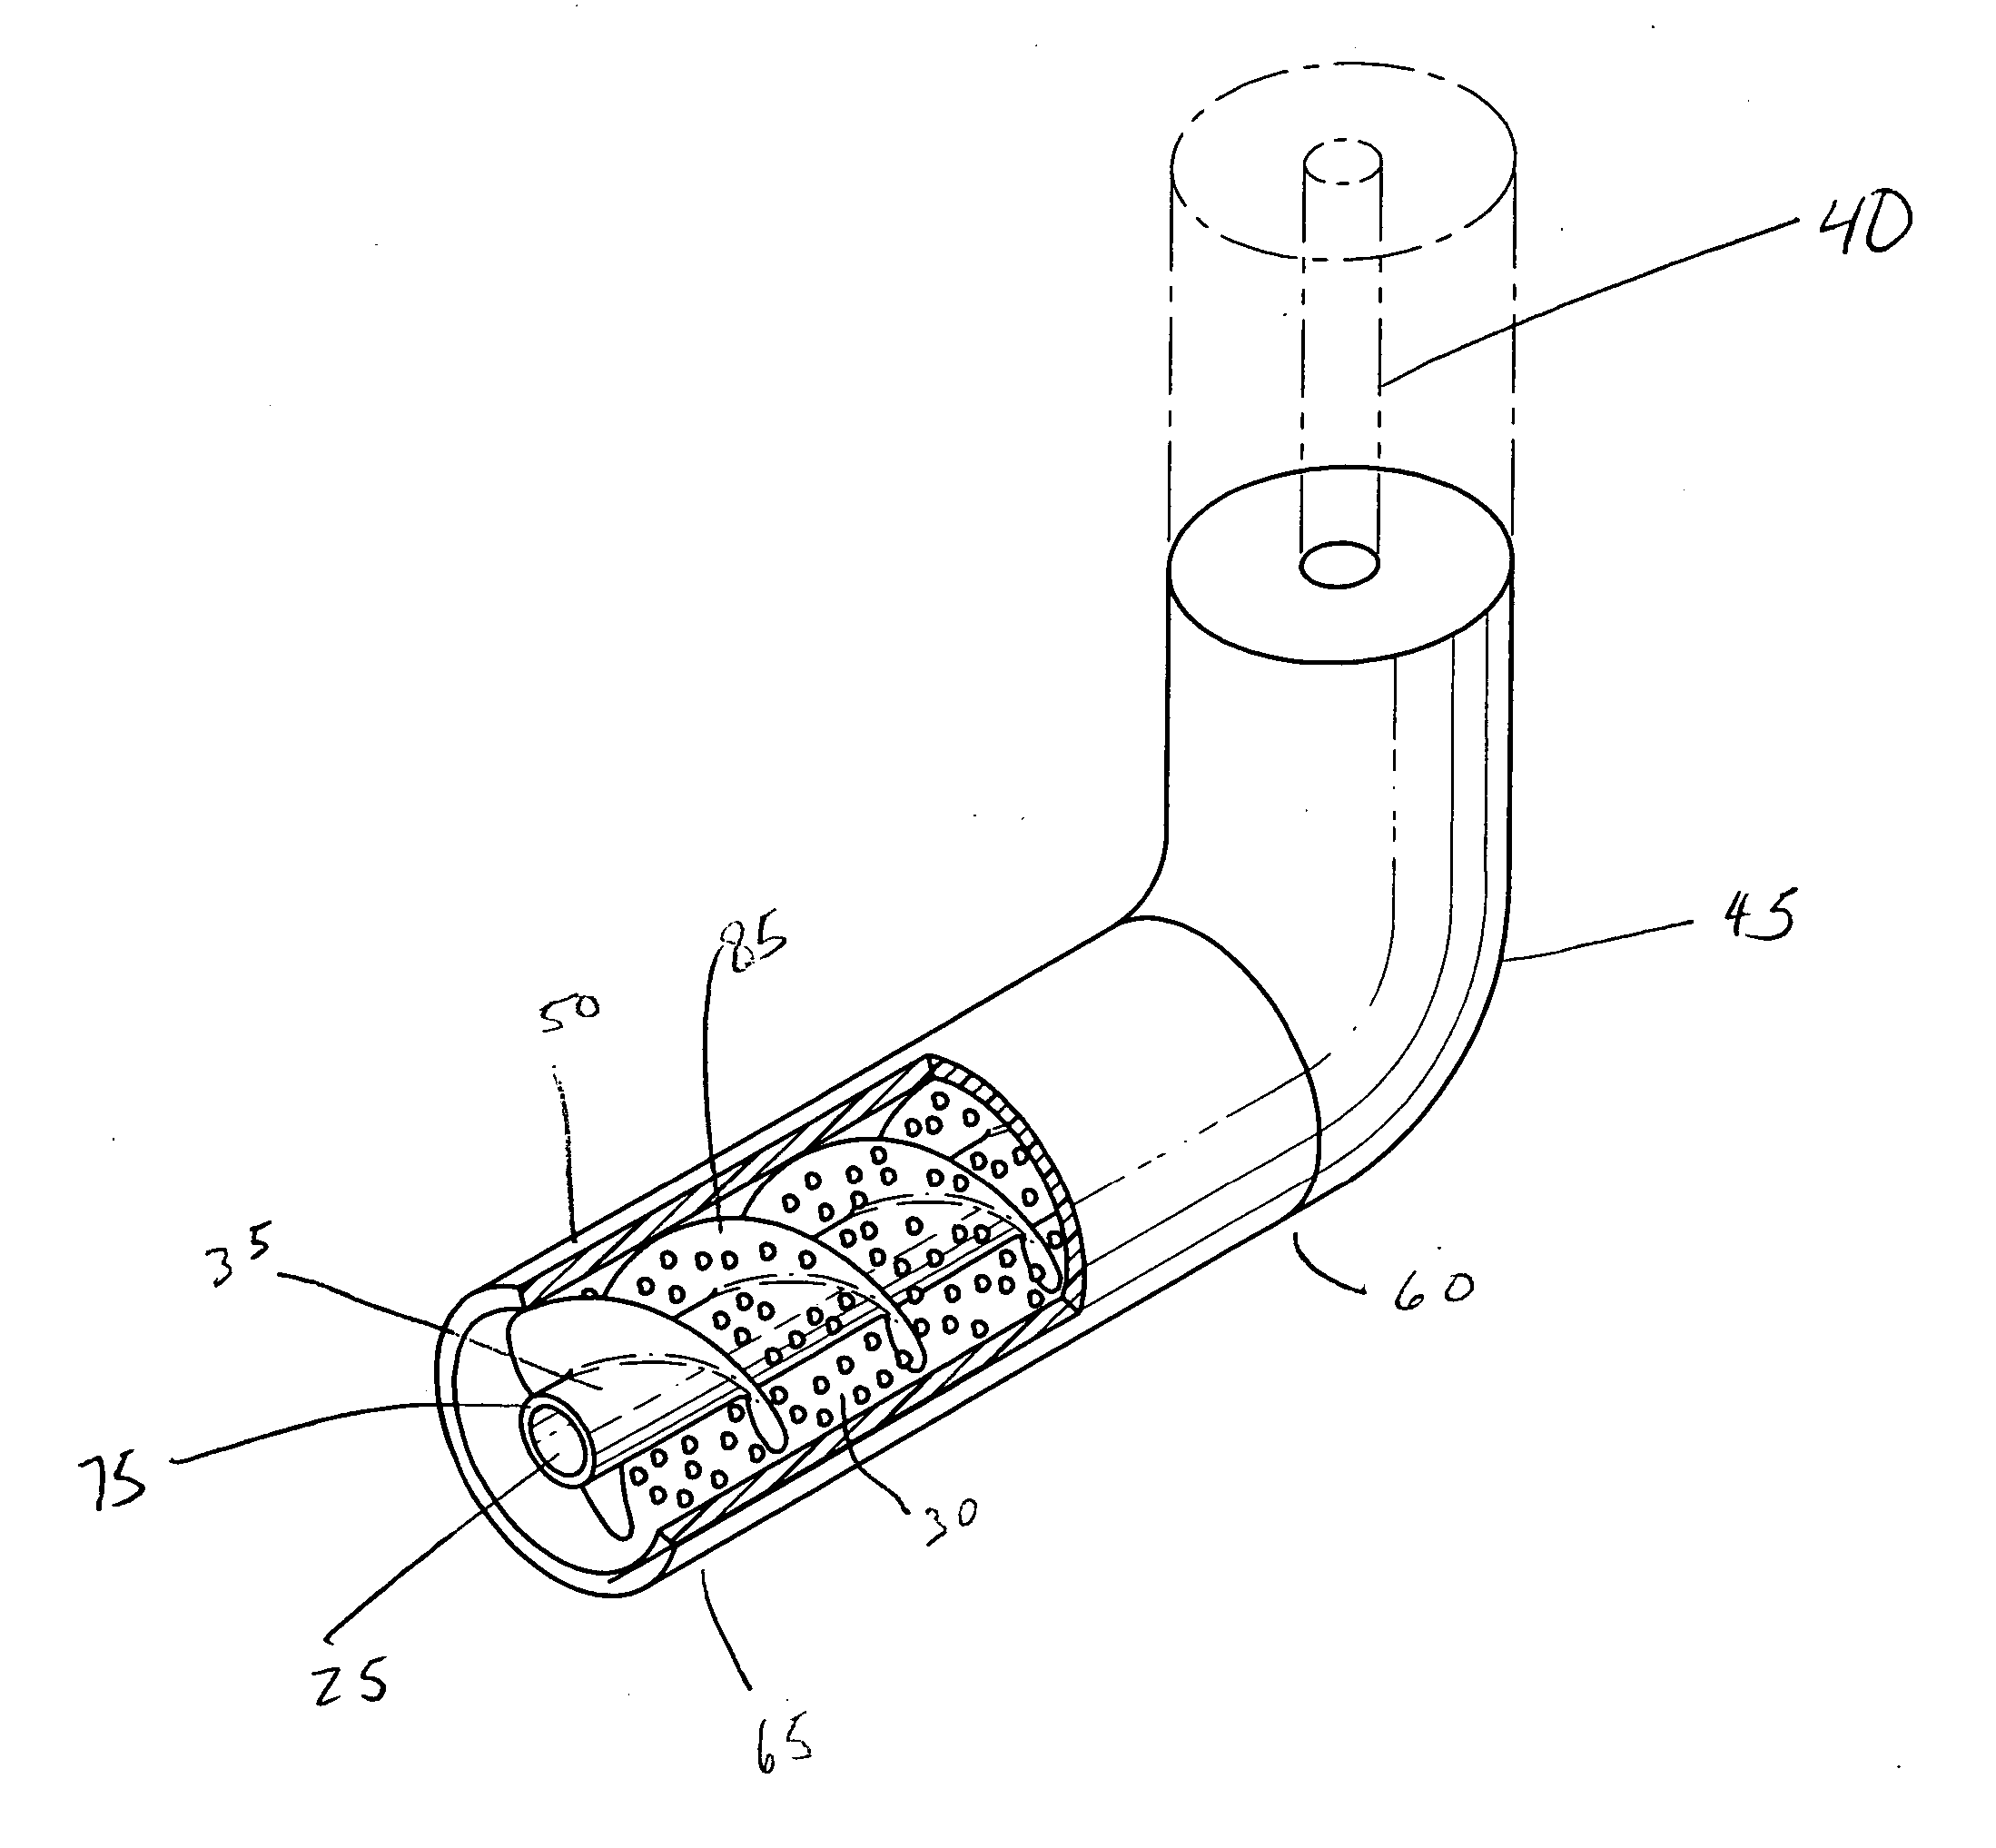 Implantable intravascular delivery device